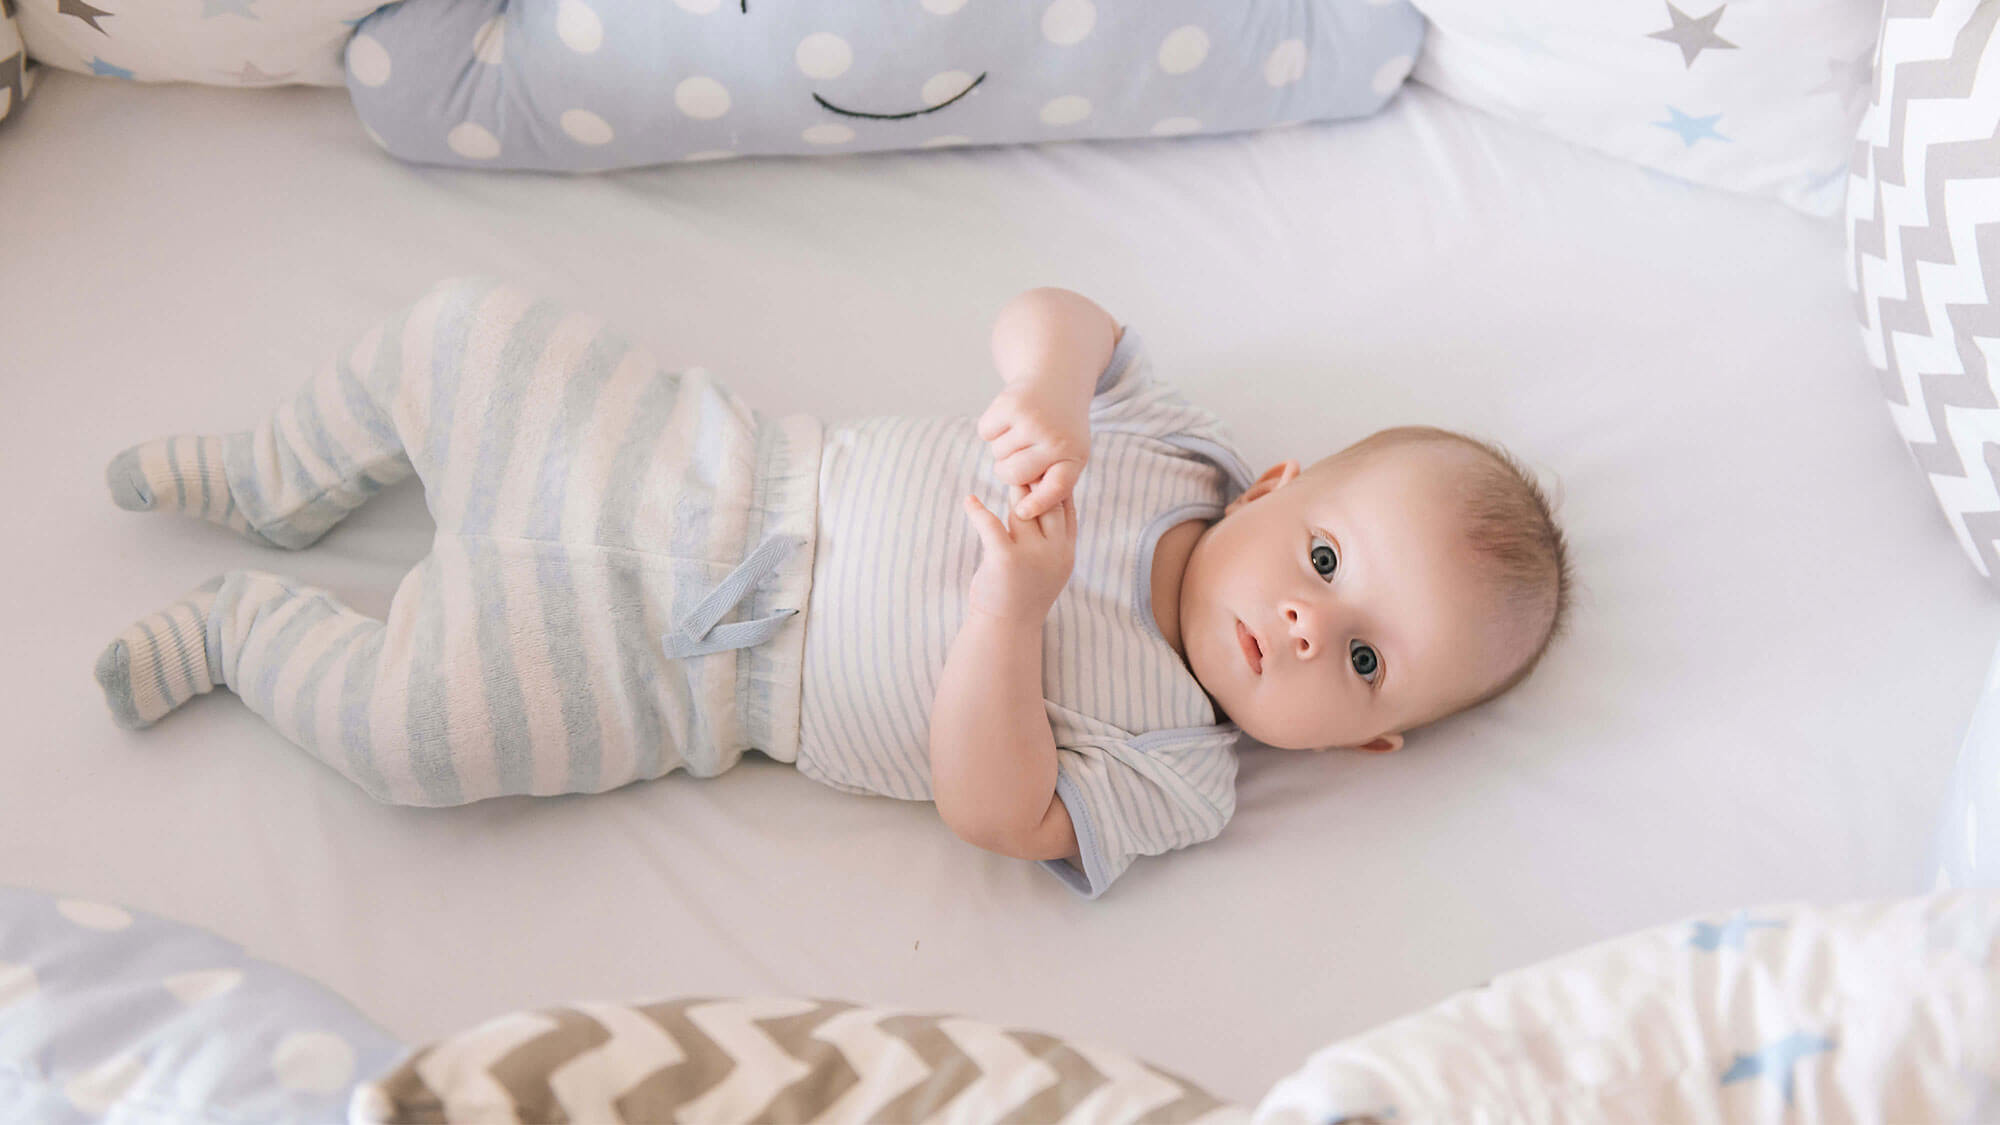 Baby in a cot with bumpers